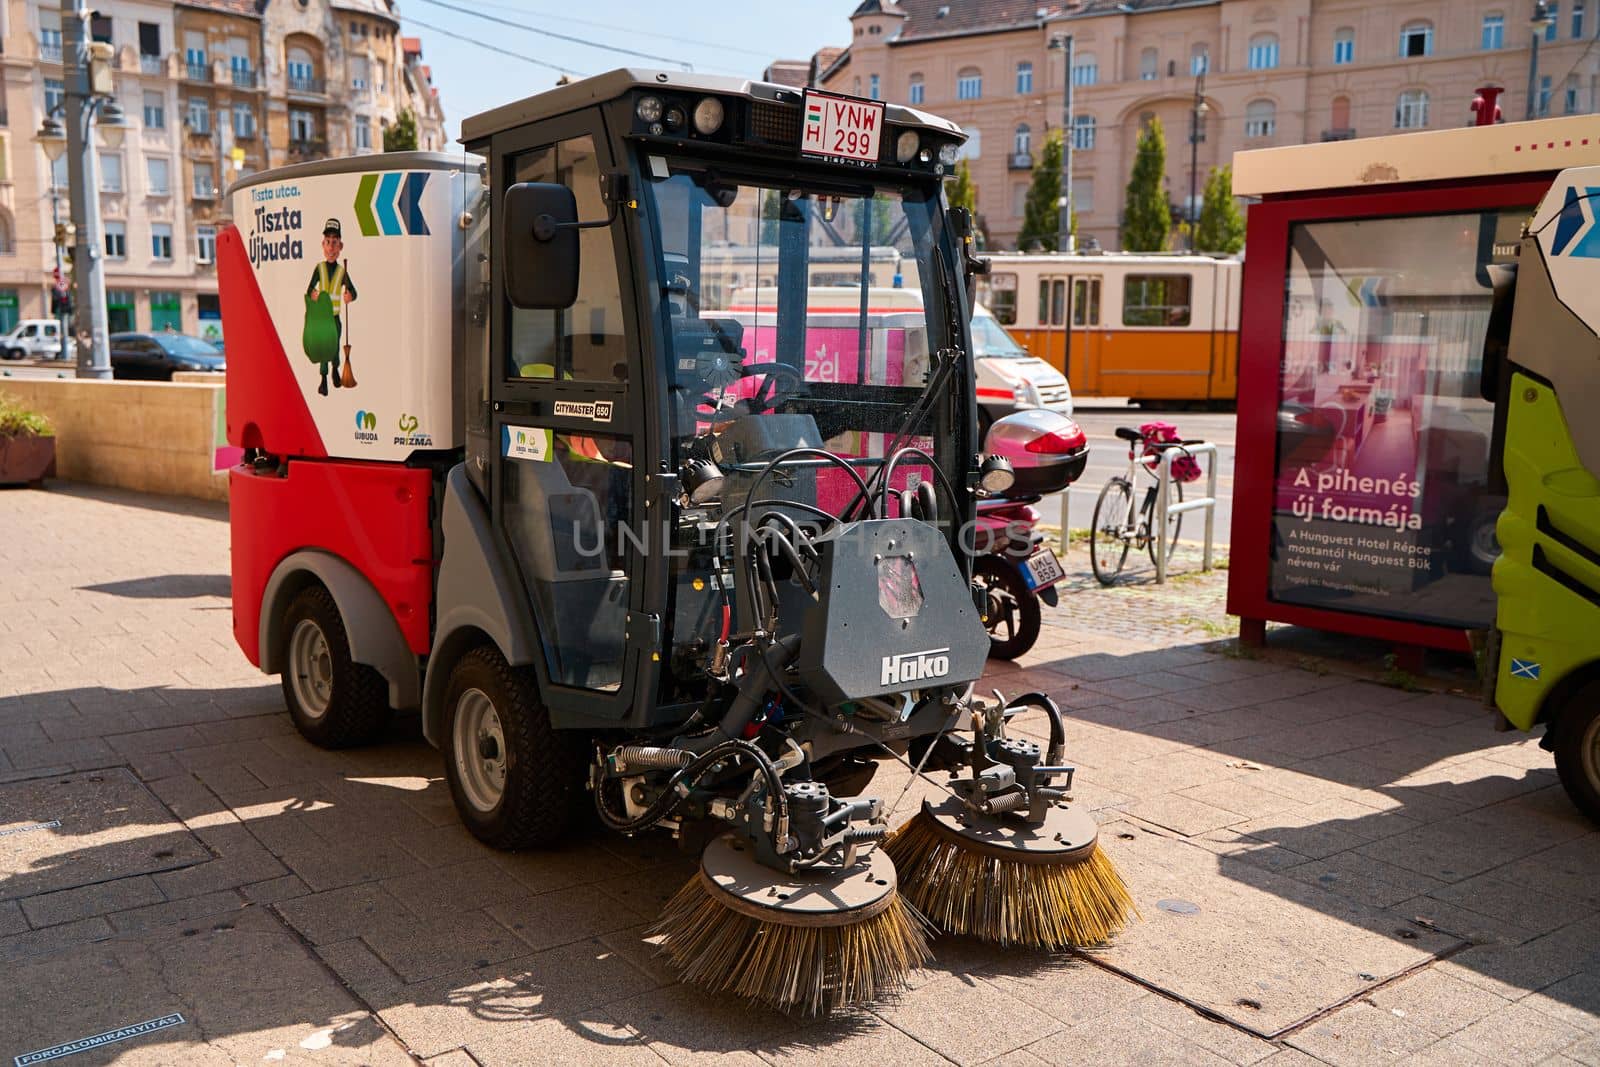 The vehicle washes the streets and cleans the pedestrian zone of the city. Budapest, Hungary - 08.25.2022